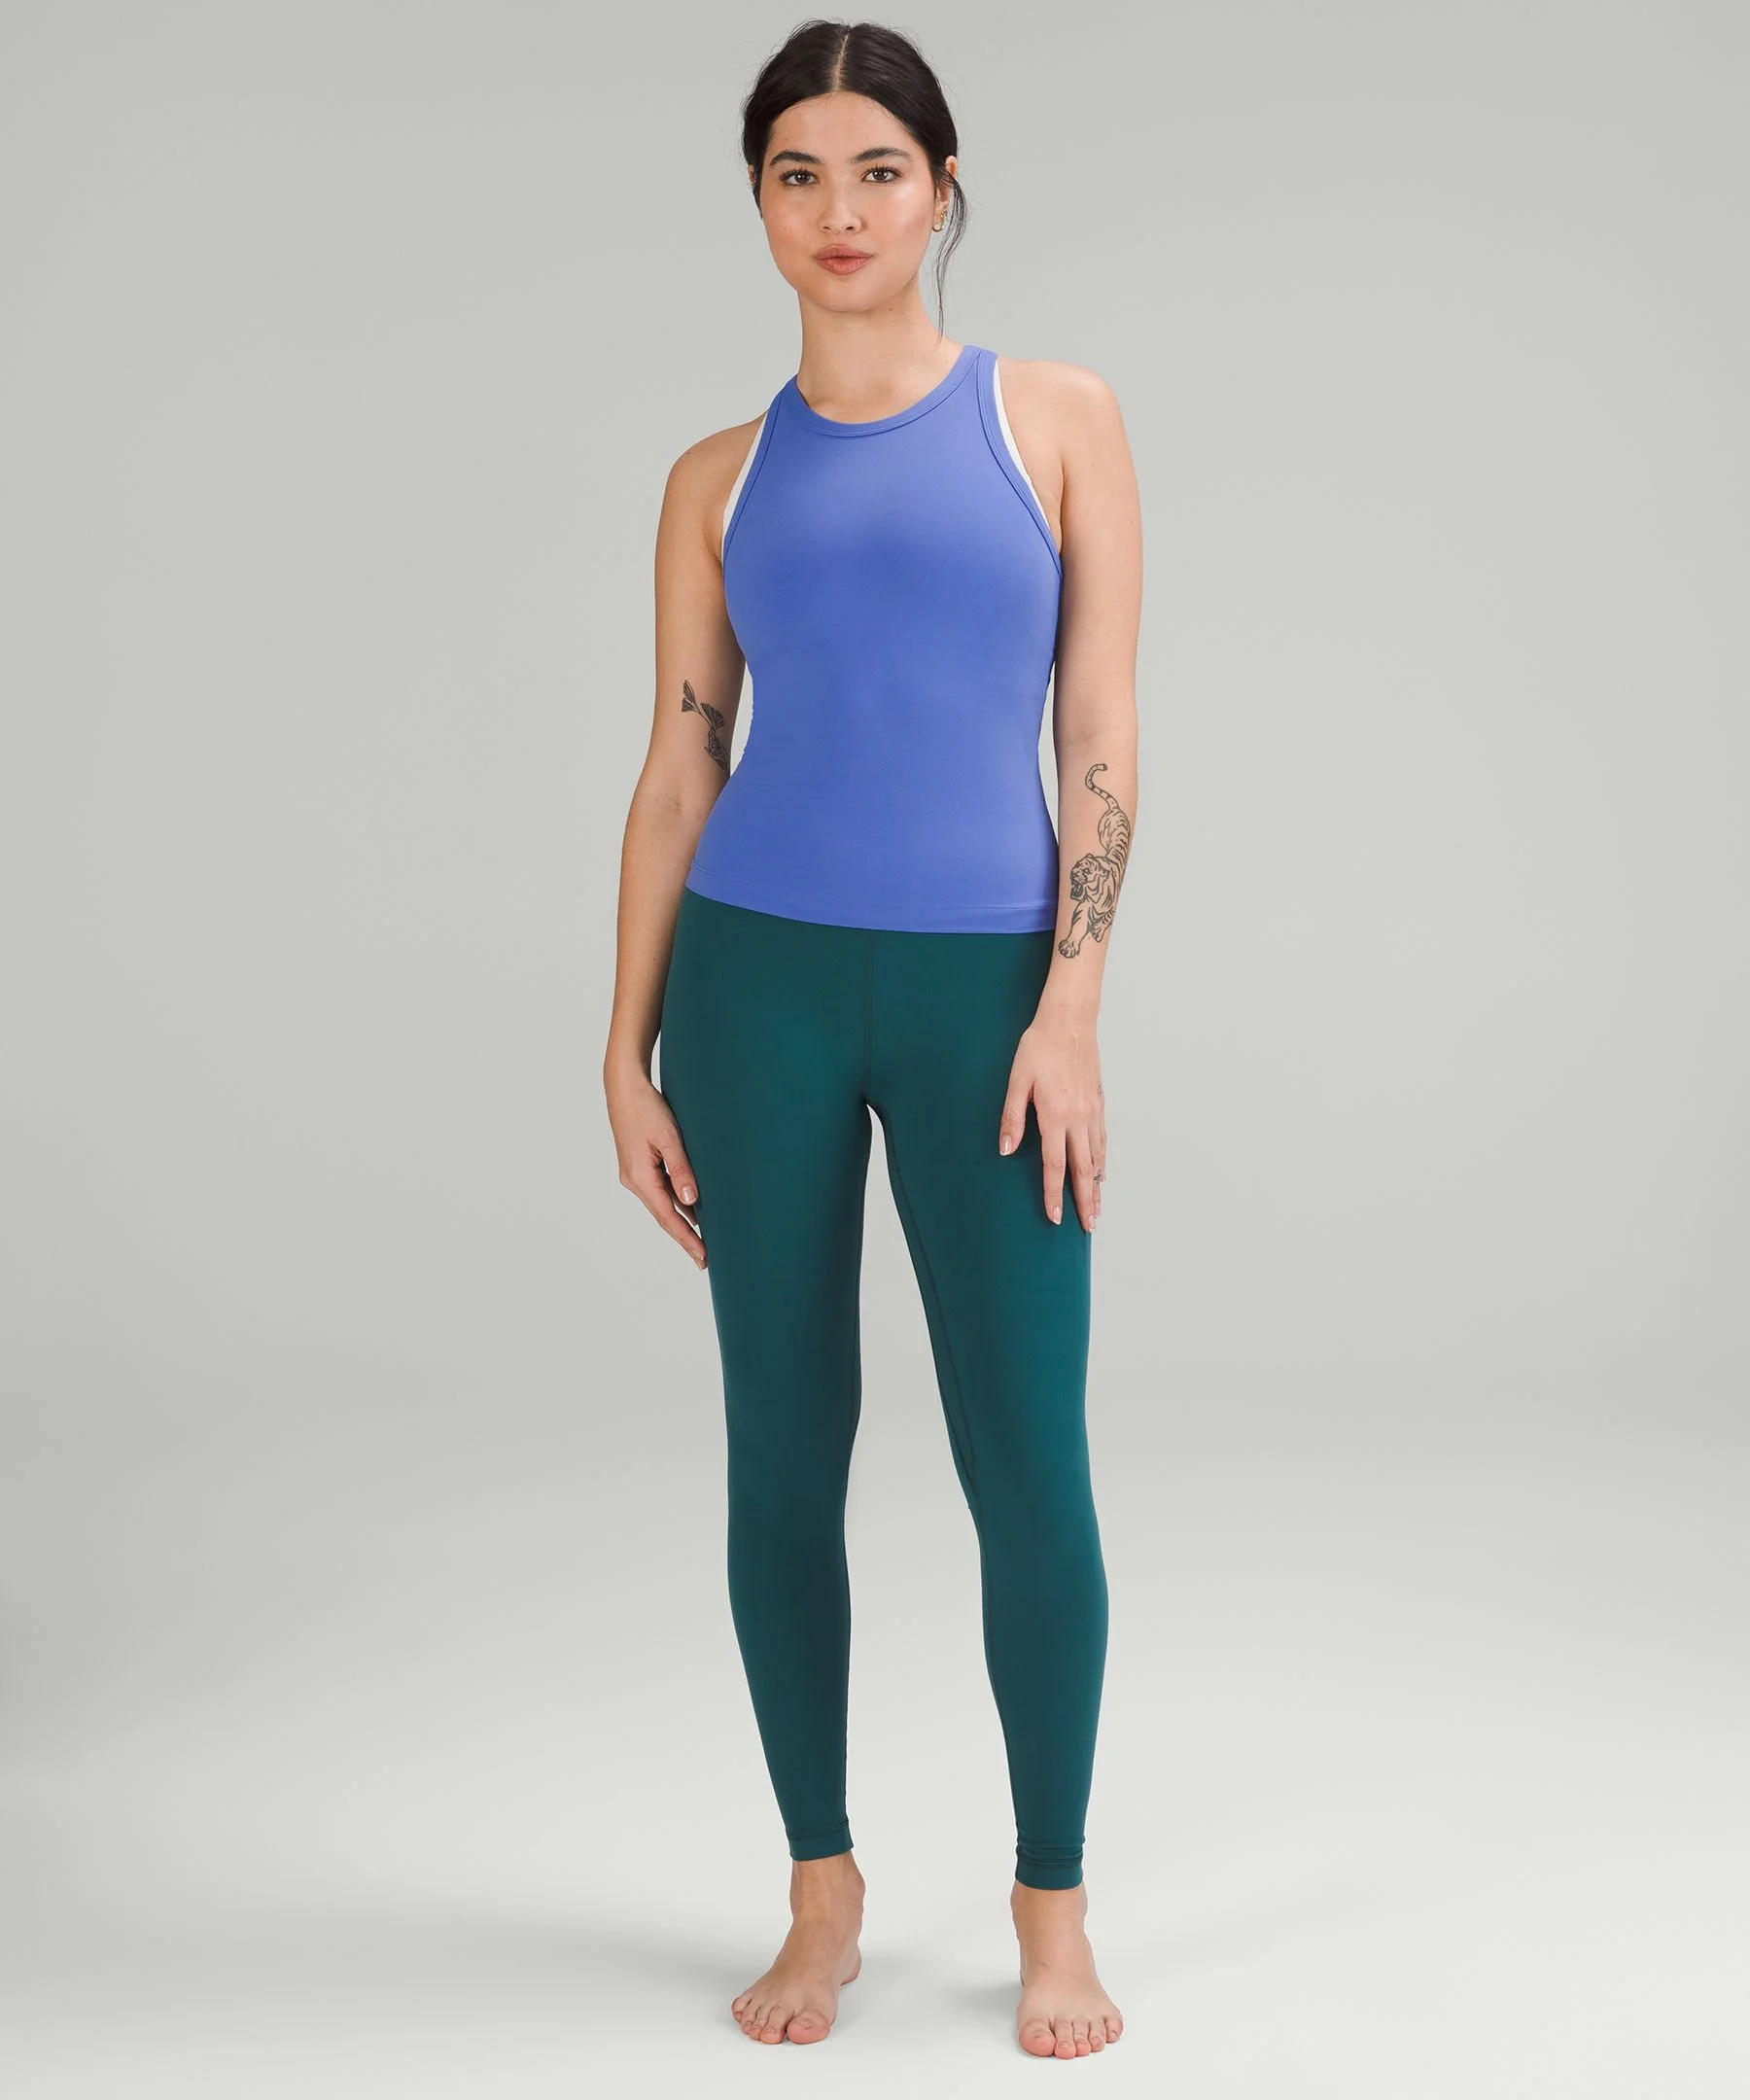 Align Tank Gathered Front Review! Remands me of old ballet leotards haha.  Details in the comment! : r/lululemon